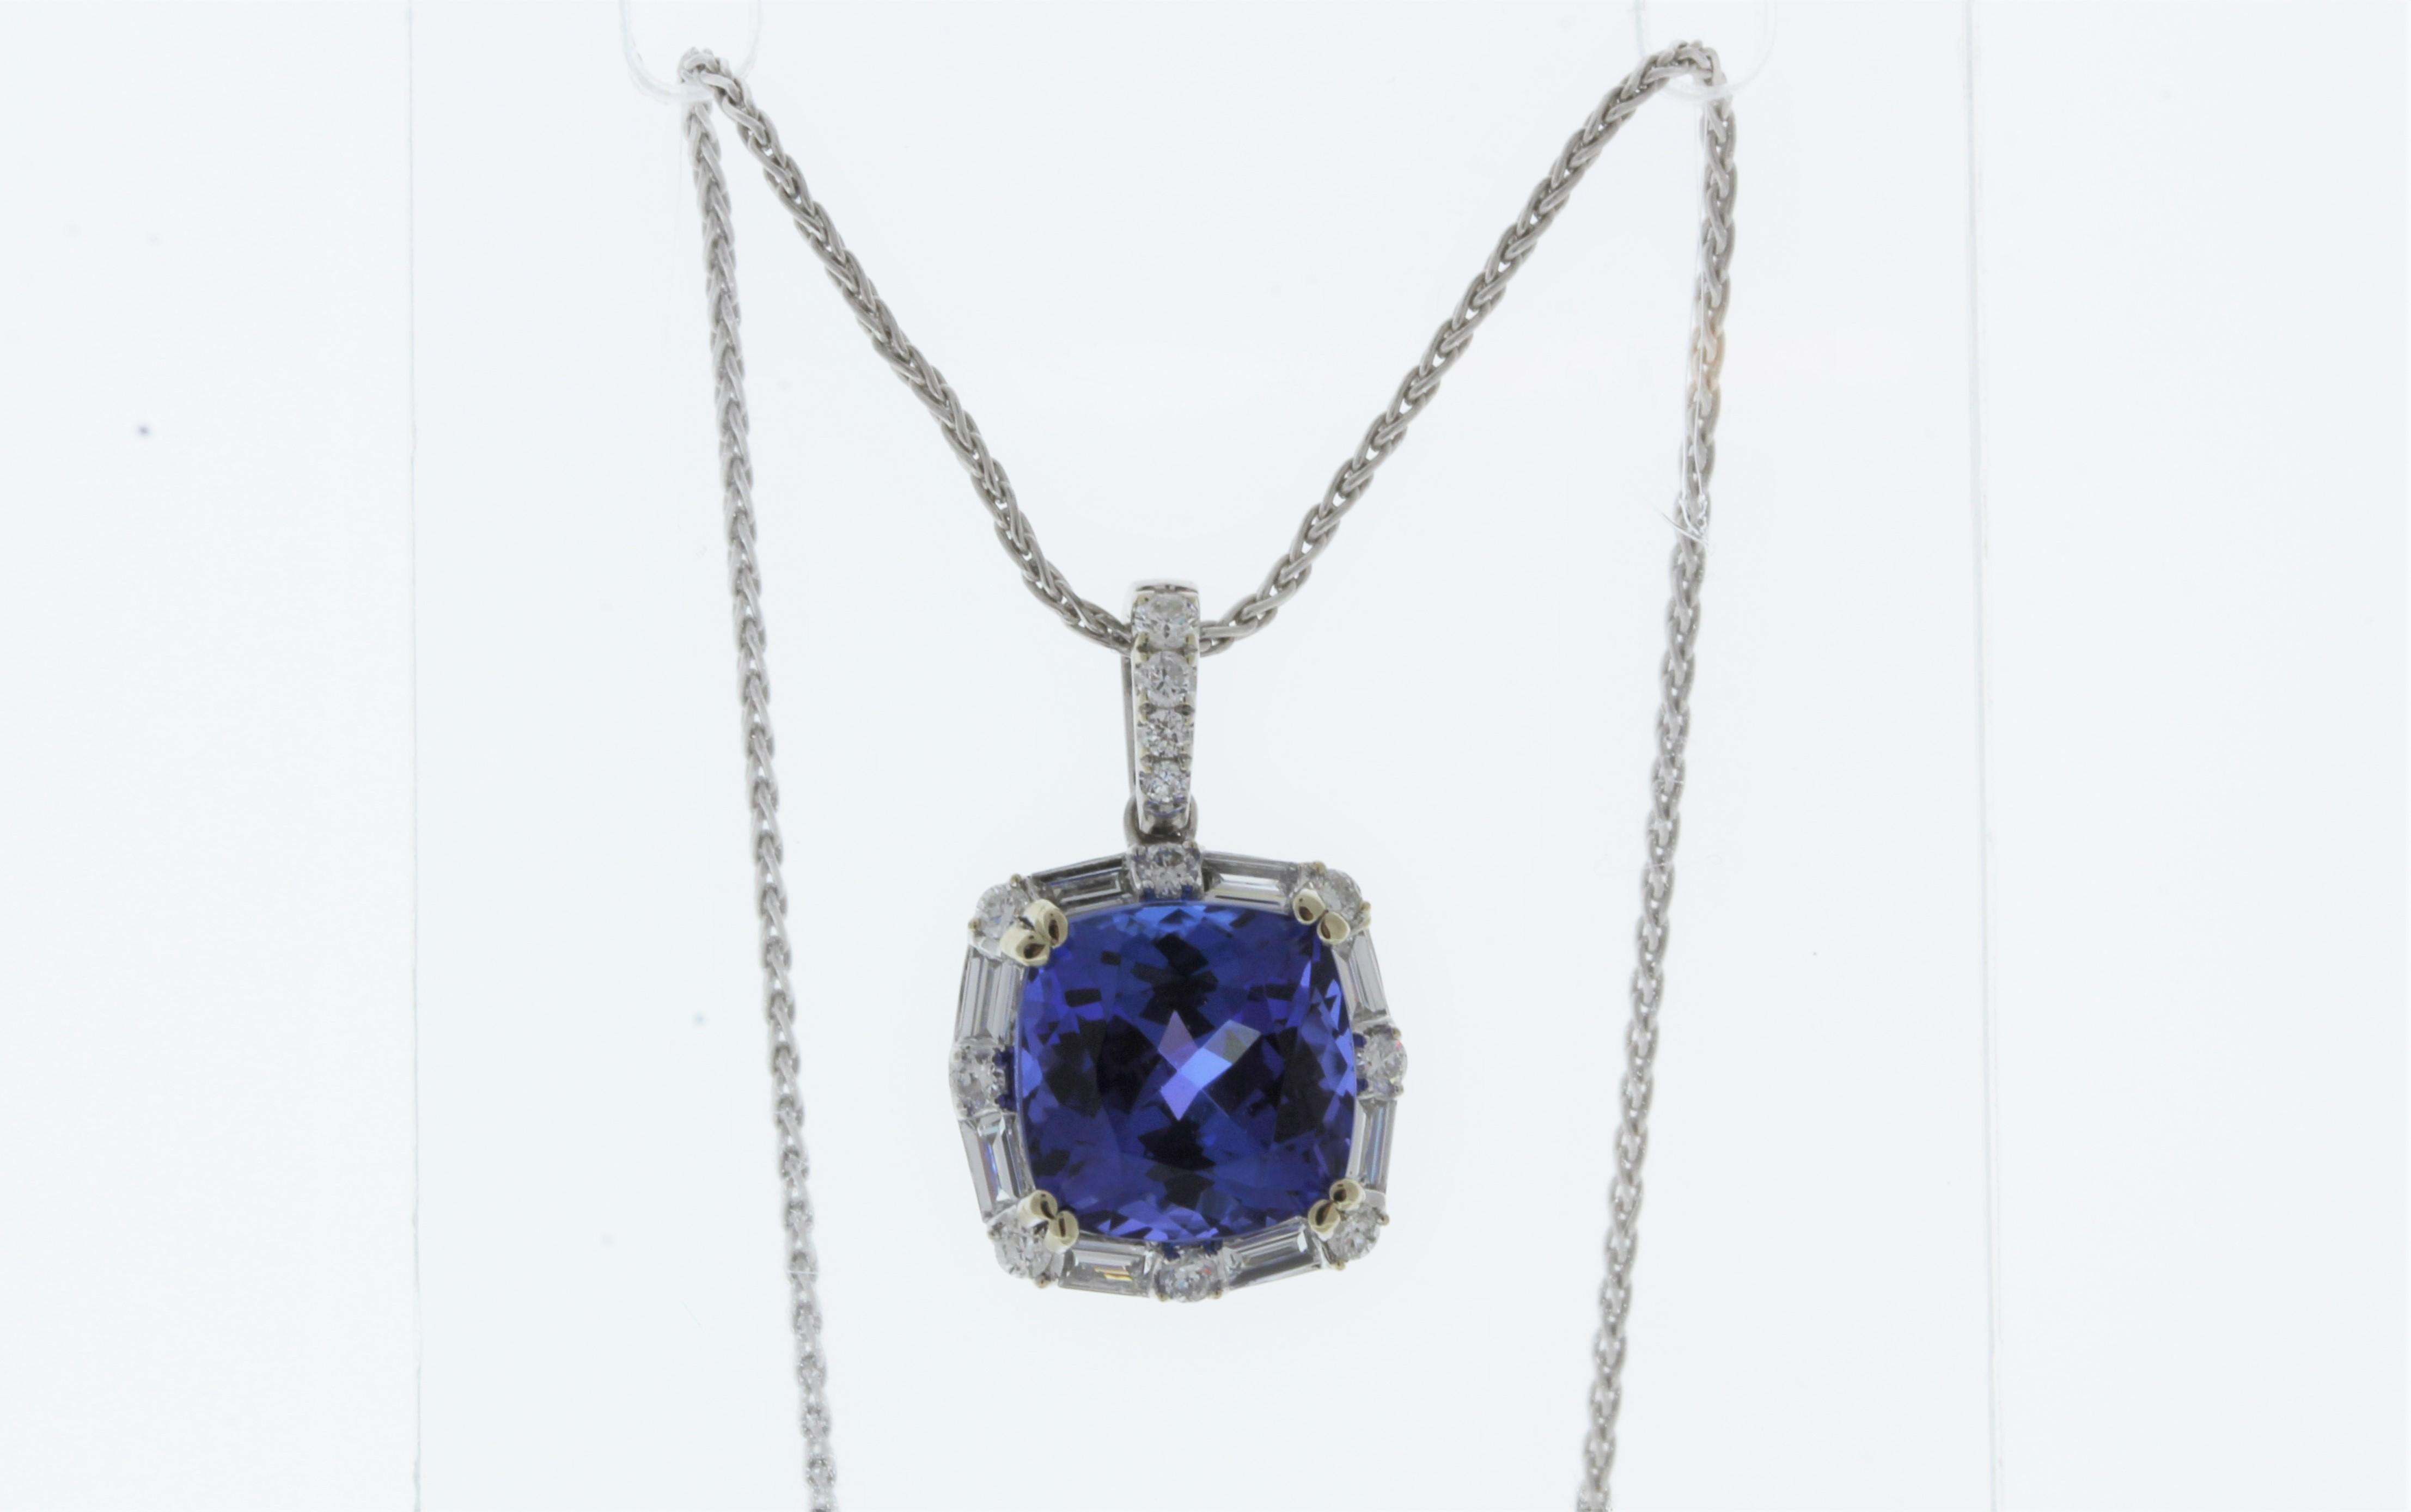 This lavish brightly polished 18 karat white gold smooth oval shaped cocktail Pendant presents one hand selected fine quality oval cut 4.97CT tanzanite prong set in the center, originating from Tanzania with a beautiful color saturation. A total of